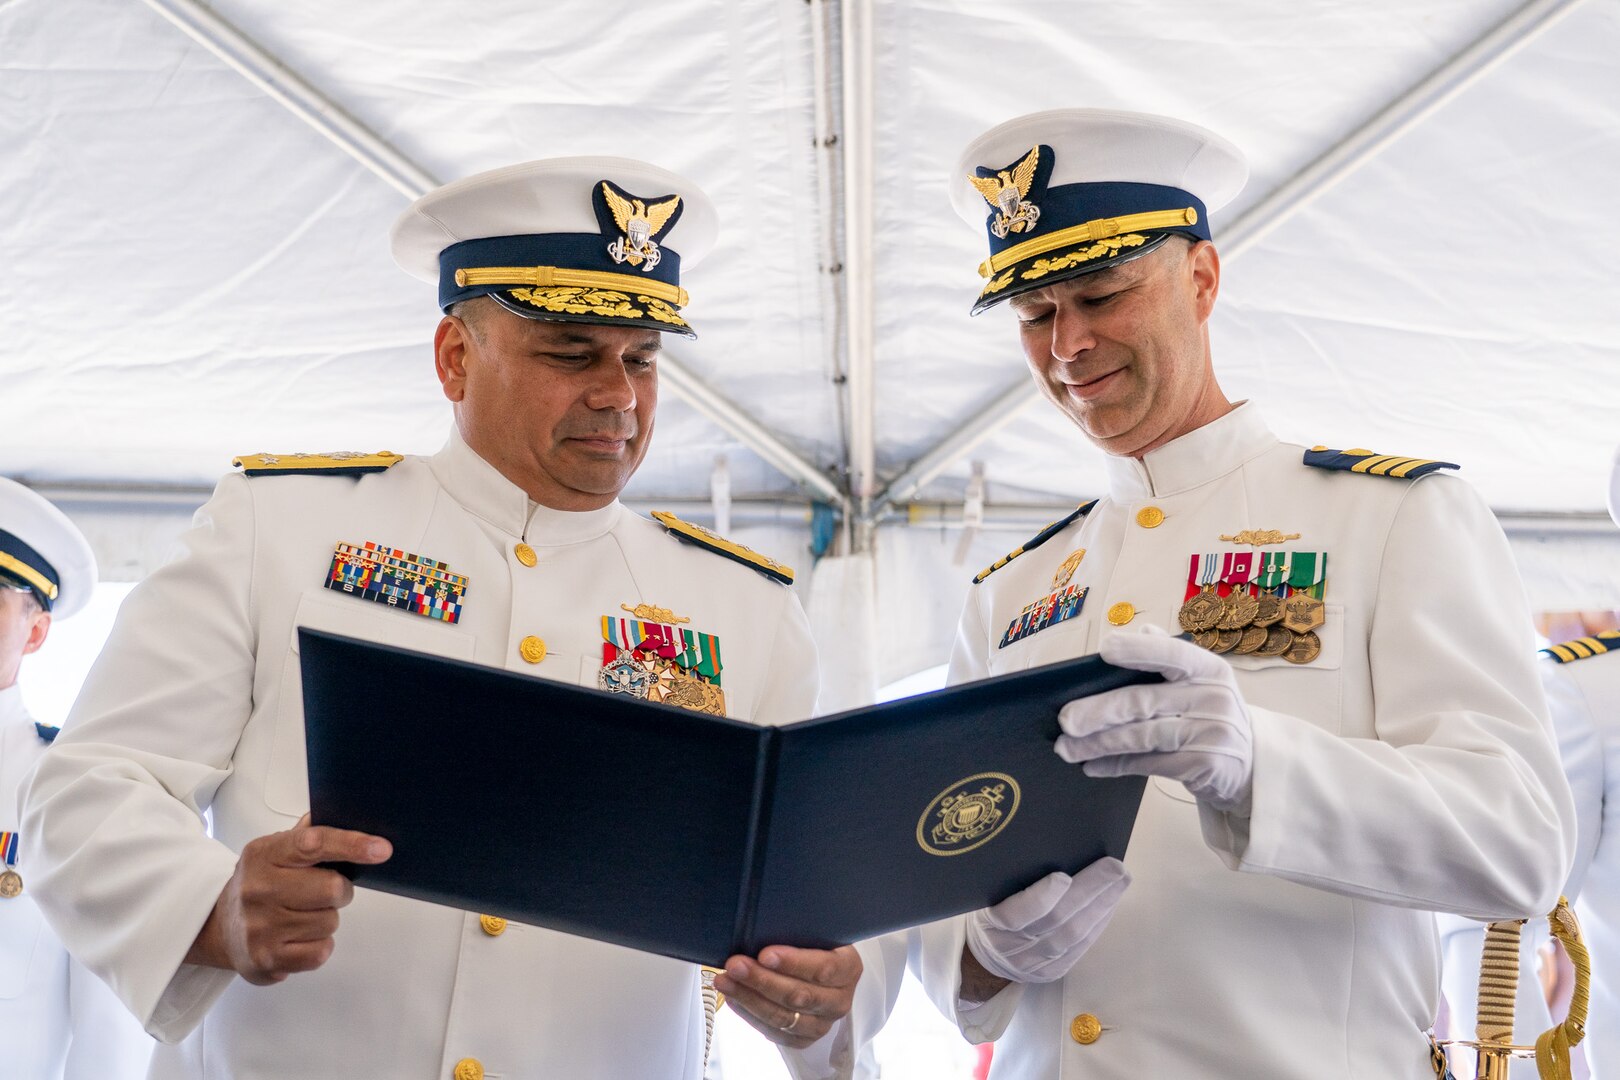 Vice Adm. Andrew Tiongson, the Coast Guard Pacific Area commander, presents the Meritorious Service Medal to Cmdr. Matthew Kolodica during the Coast Guard Cutter Alert's (WMEC 630) change of command ceremony in Astoria, Oregon, June 29, 2023. During the ceremony, Cmdr. Lee Crusius relieved Kolodica as the cutter’s commanding officer. (U.S. Coast Guard photo by Petty Officer 1st Class Travis Magee)